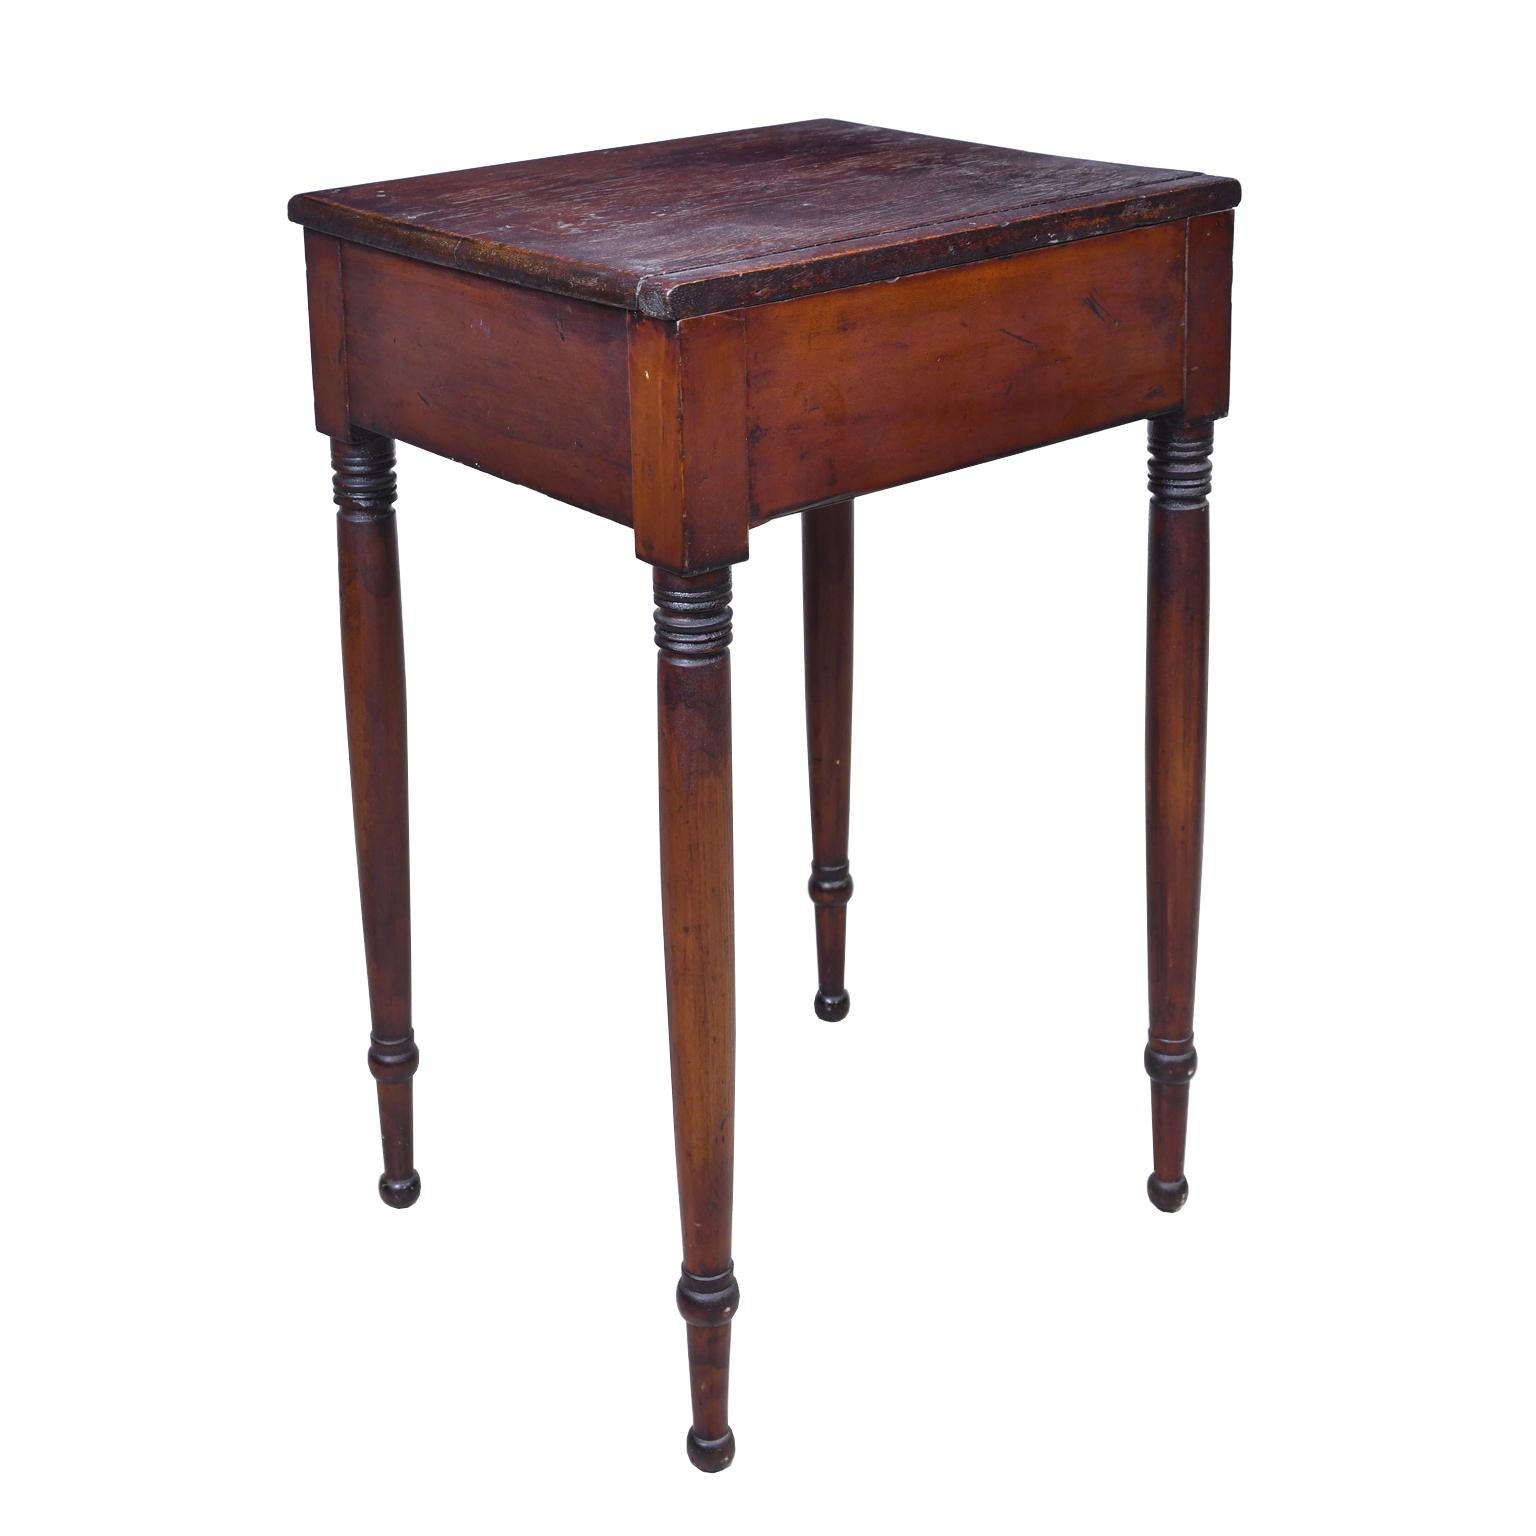 Early 19th Century Small Federal or Sheraton Nightstand in Mahogany, circa 1800